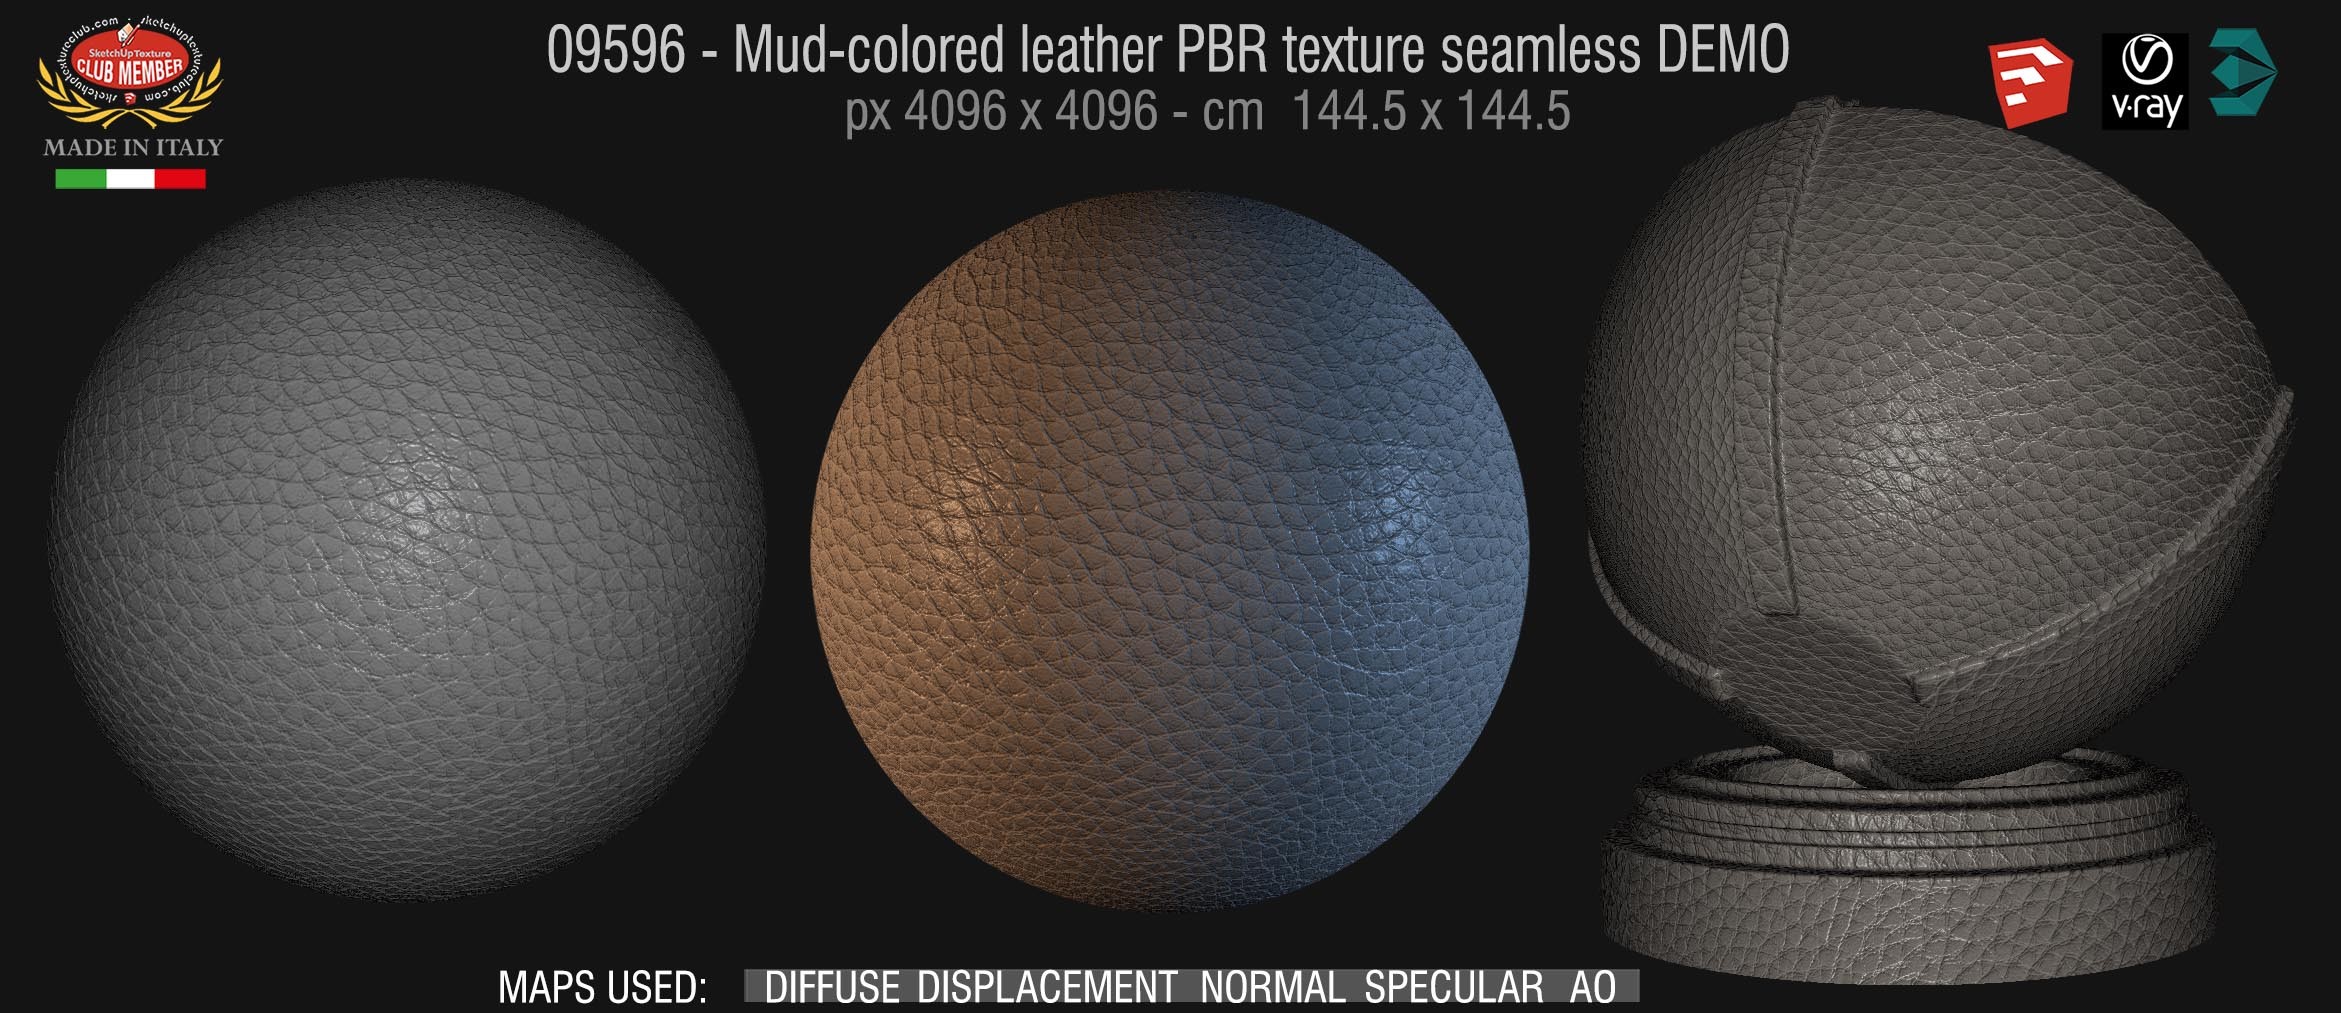 09596 Mud-colored leather PBR texture seamless DEMO